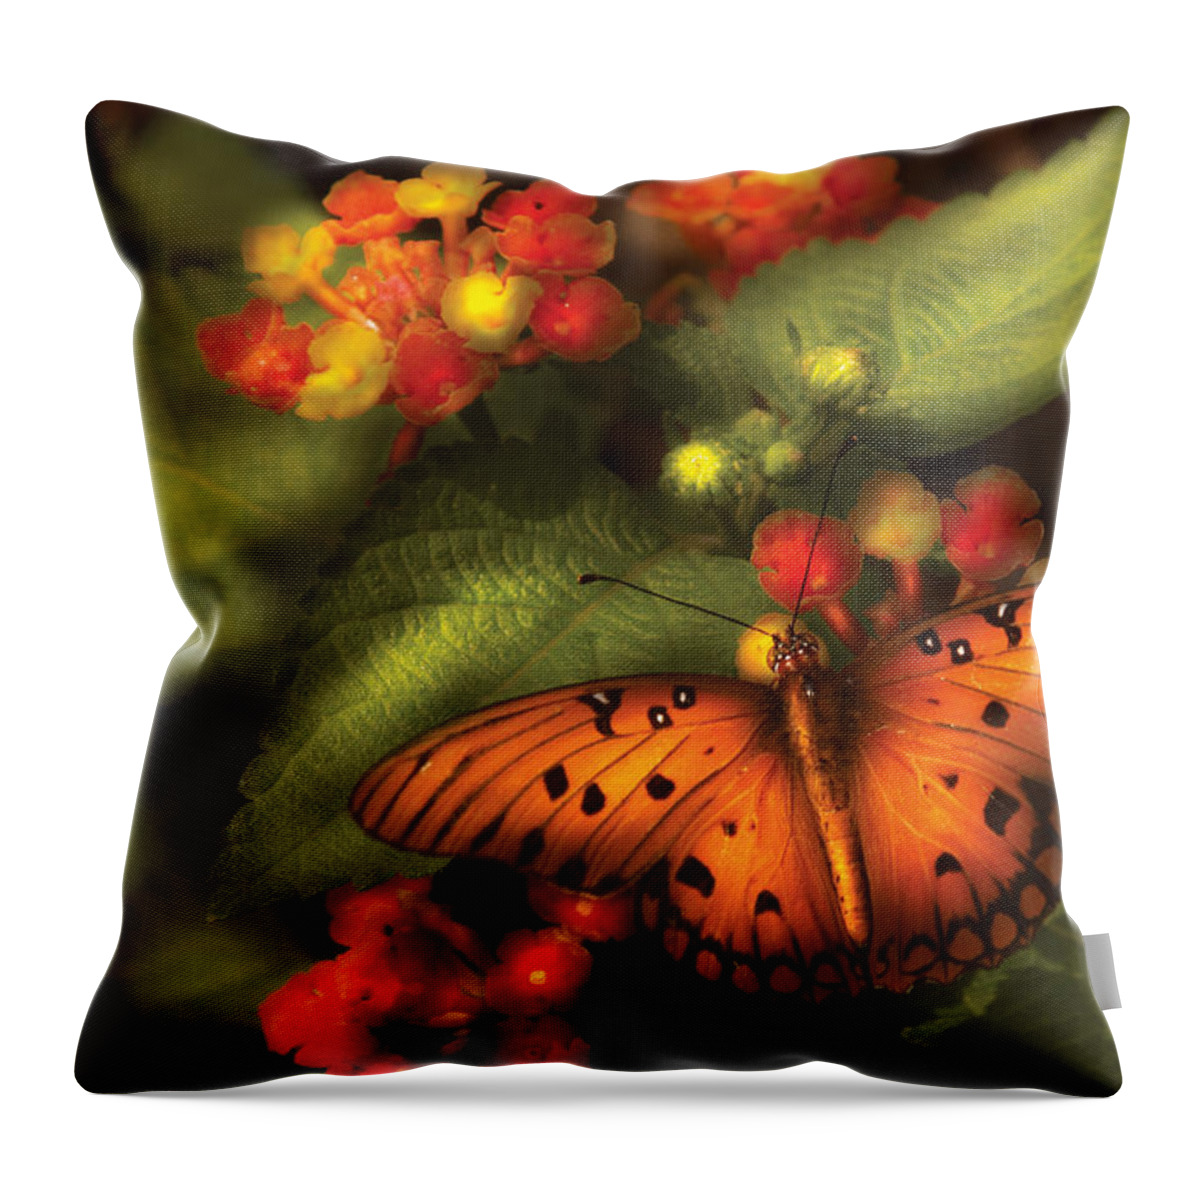 Savad Throw Pillow featuring the photograph Insect - Butterfly - Heliconius by Mike Savad